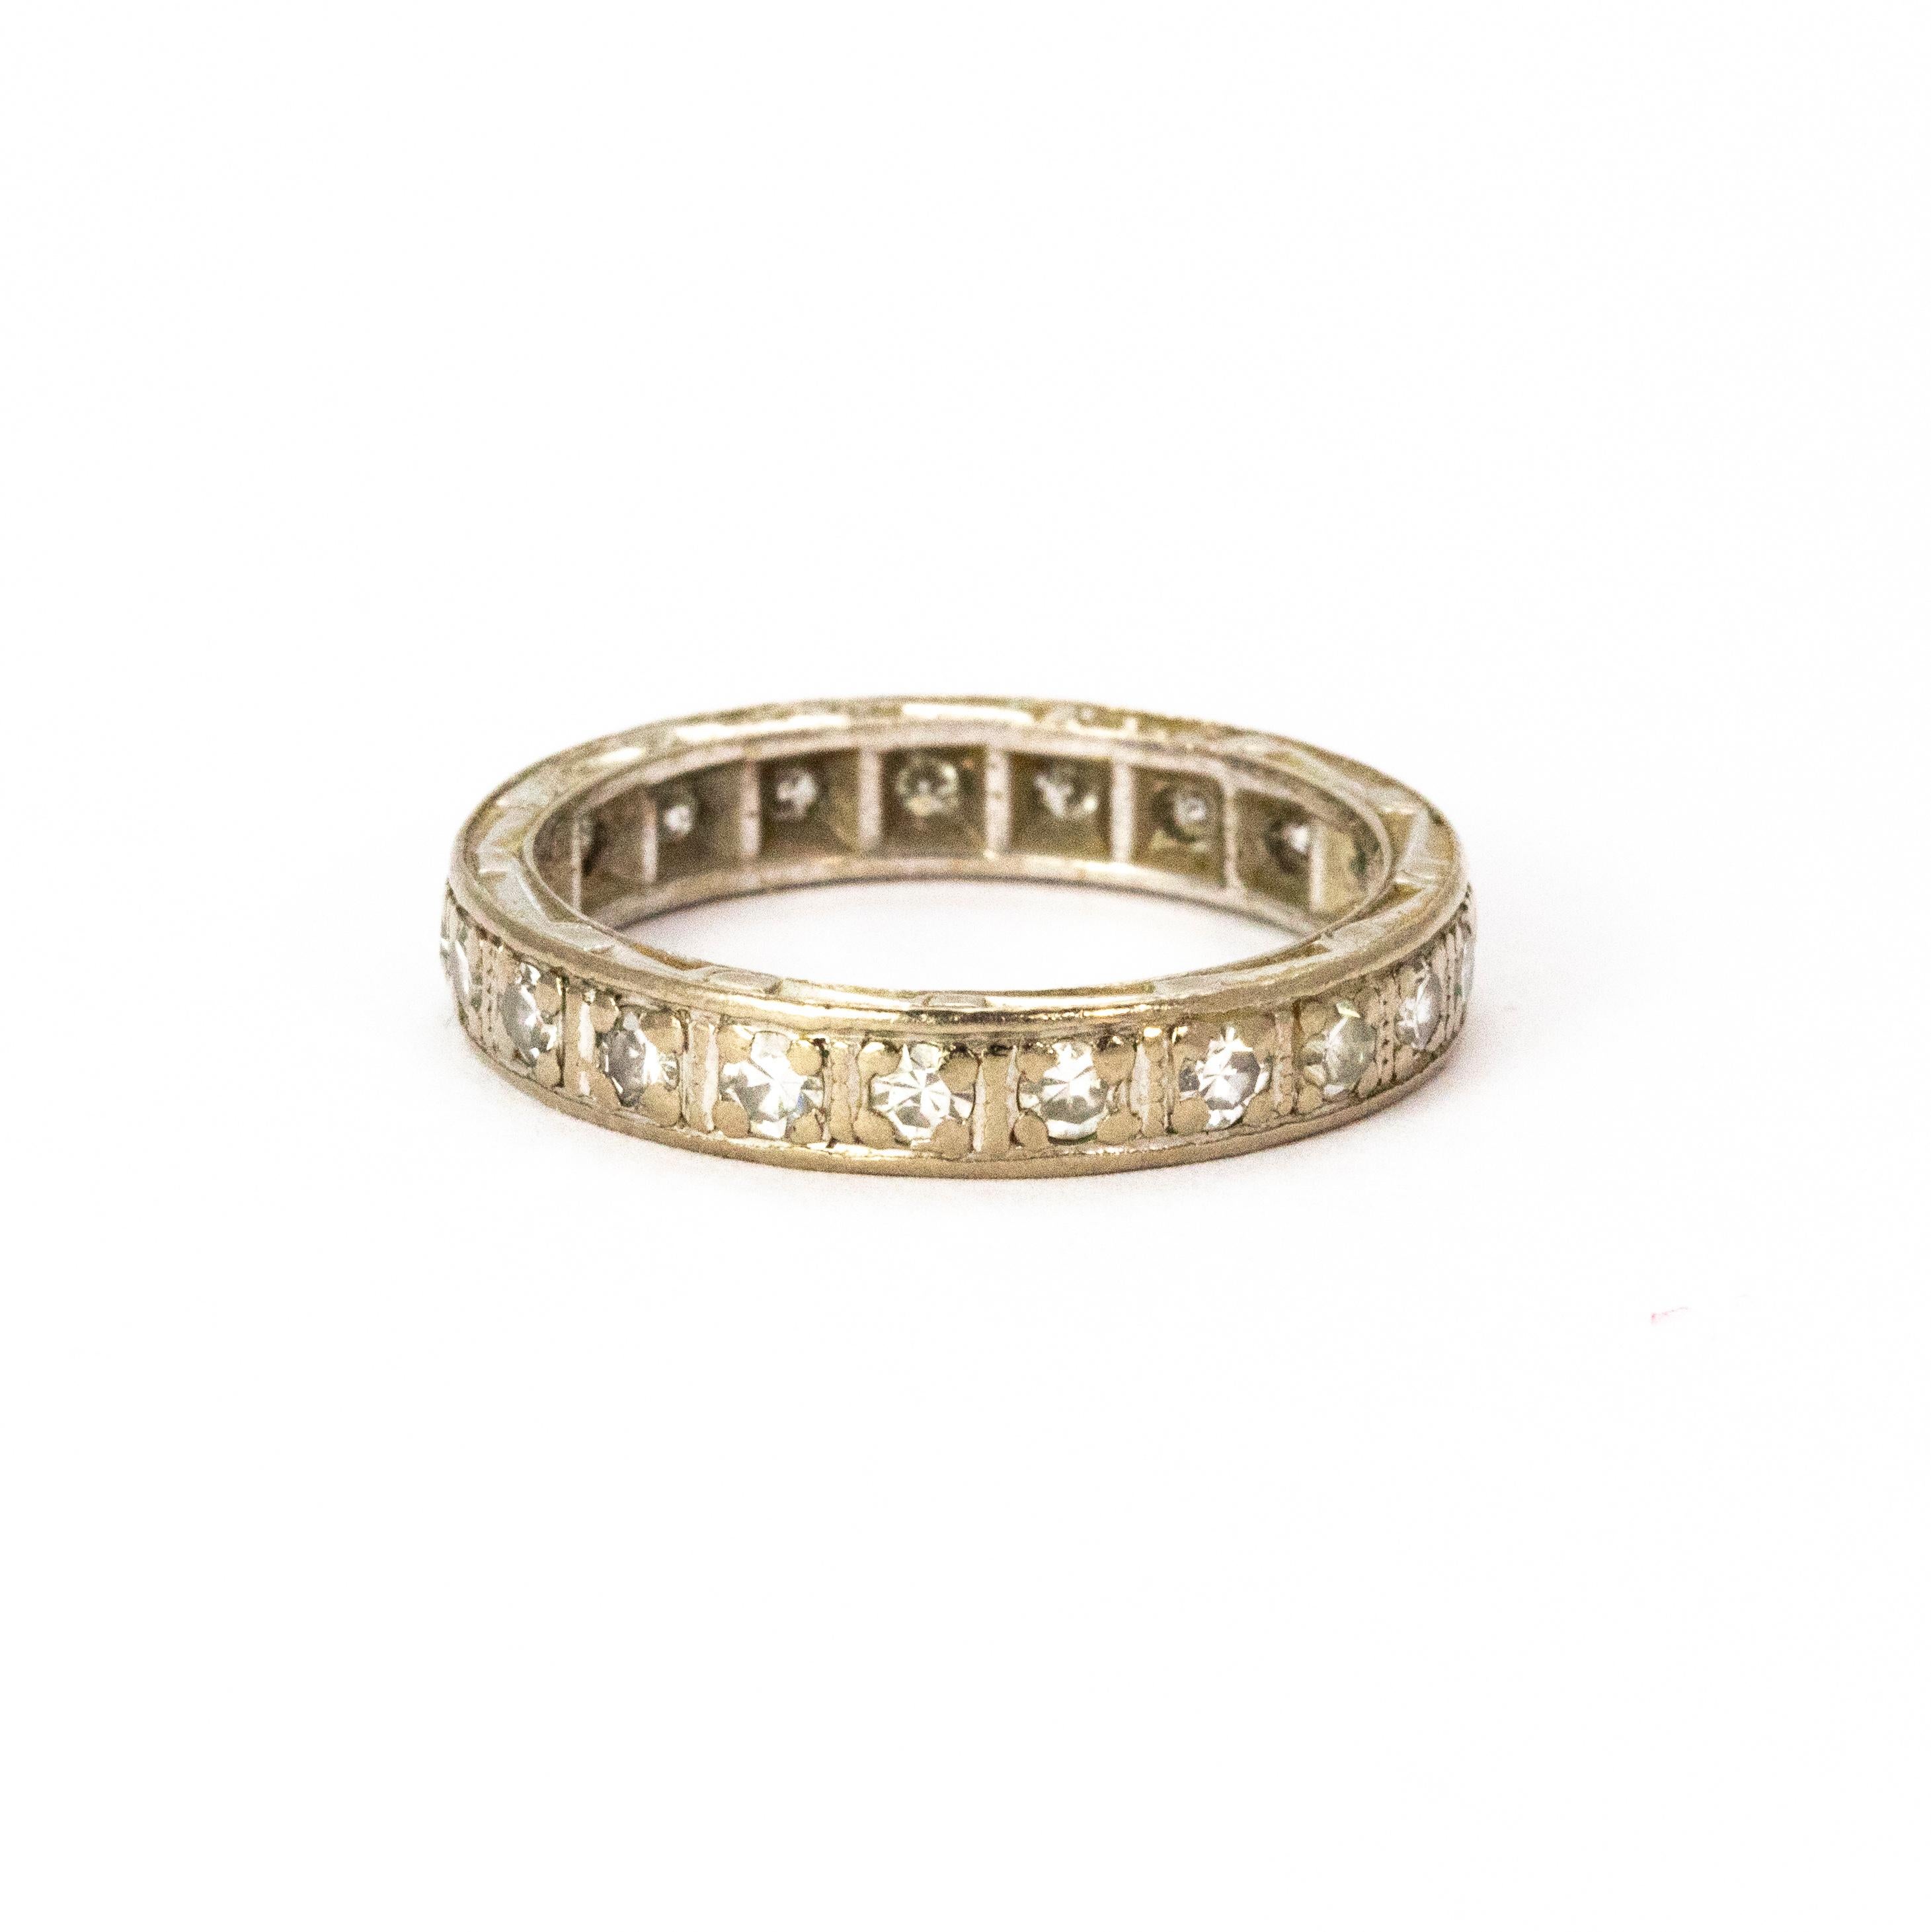 18 Karat White Gold Diamond Eternity Band In Good Condition For Sale In Chipping Campden, GB